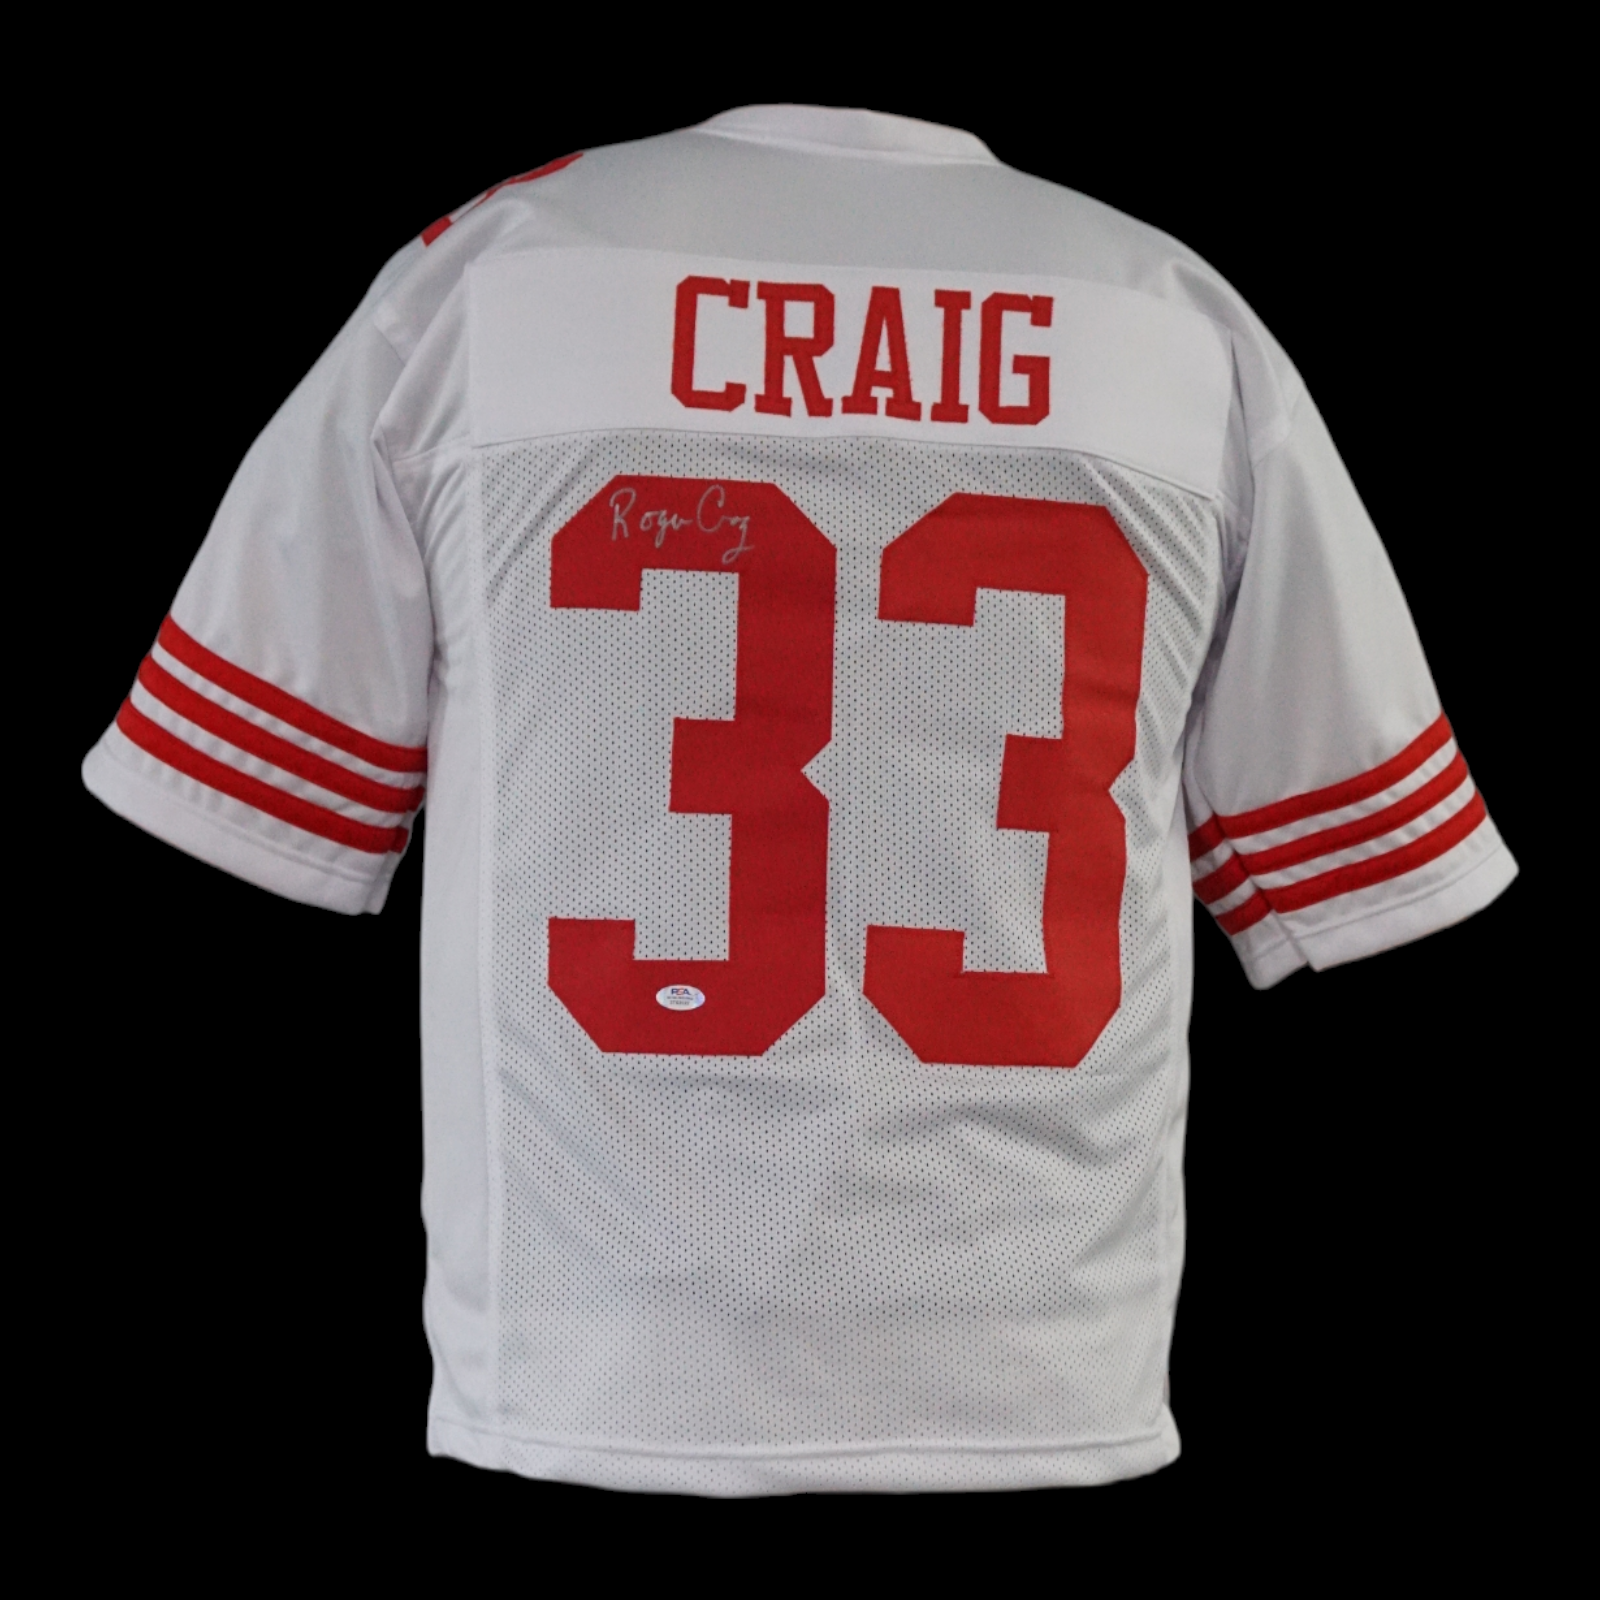 Home Red Jersey & Away White Jersey - Signed by Roger Craig